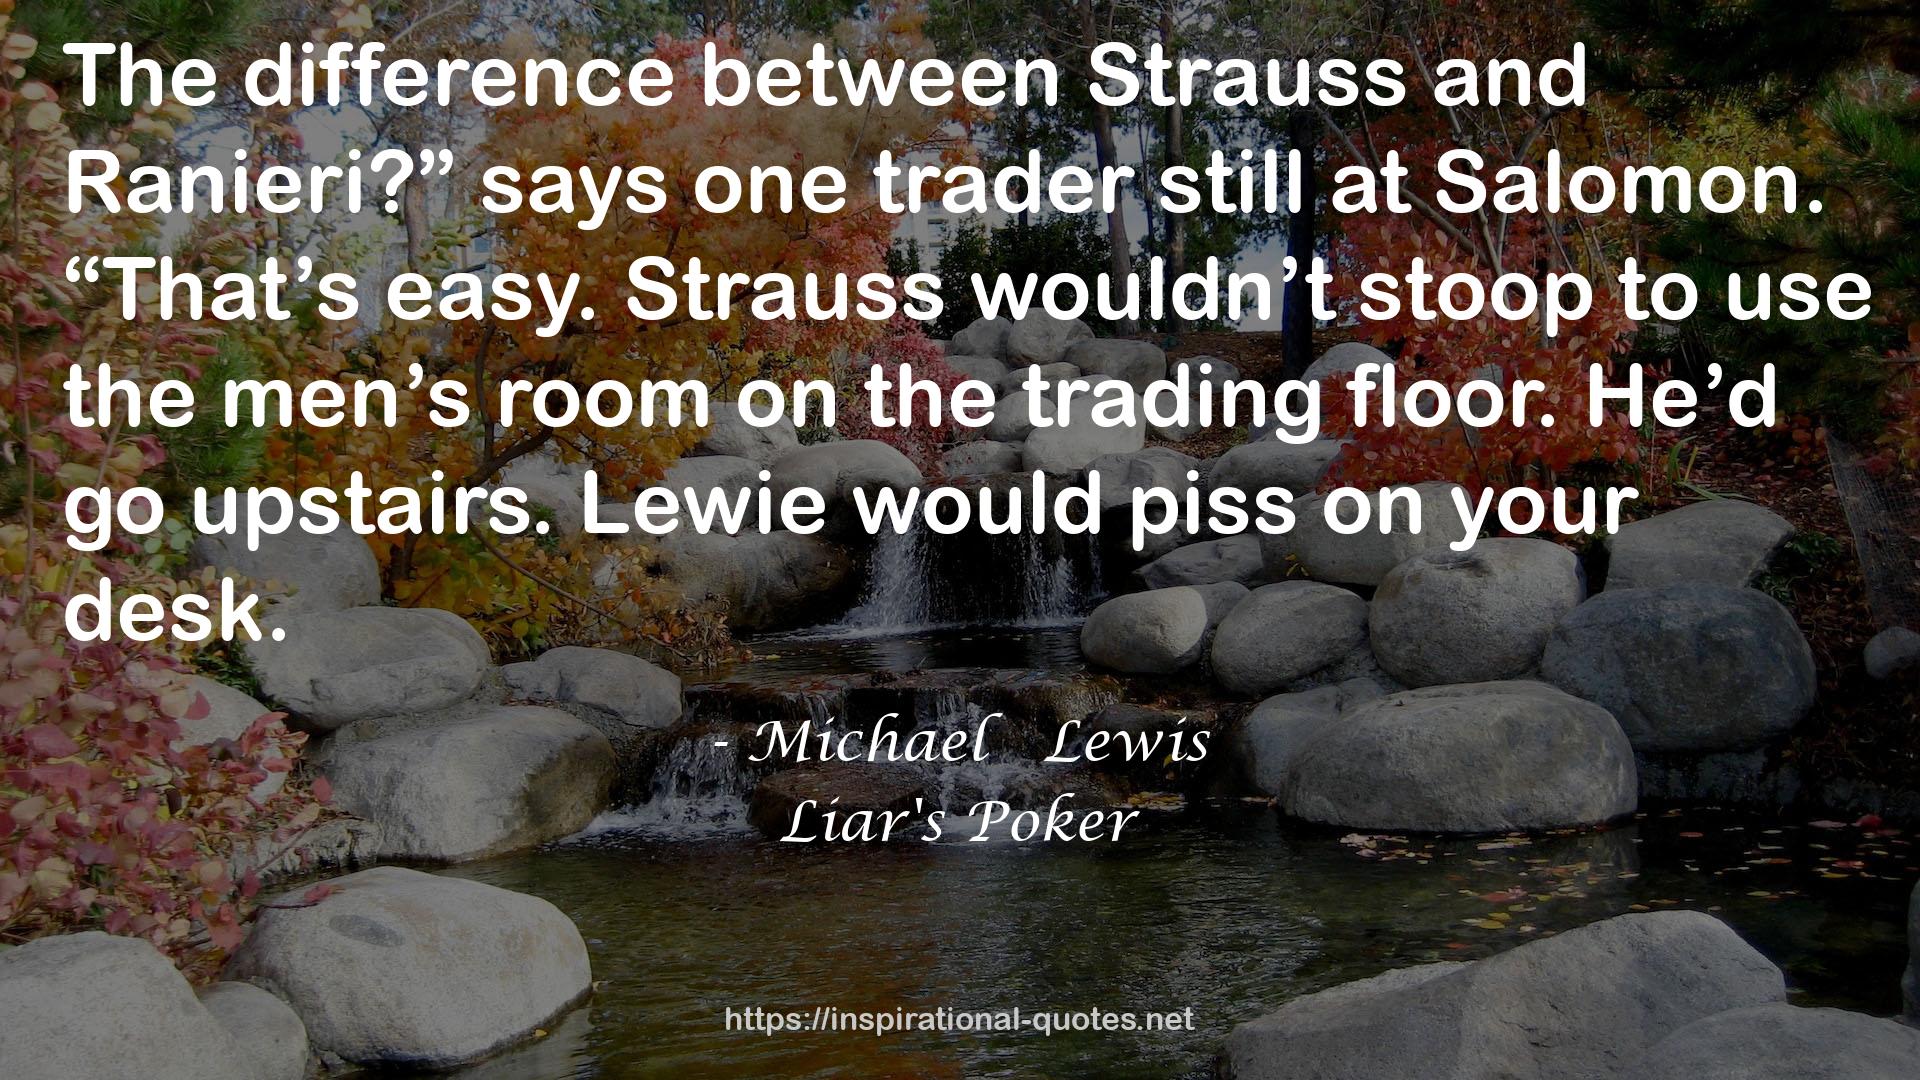 Liar's Poker QUOTES